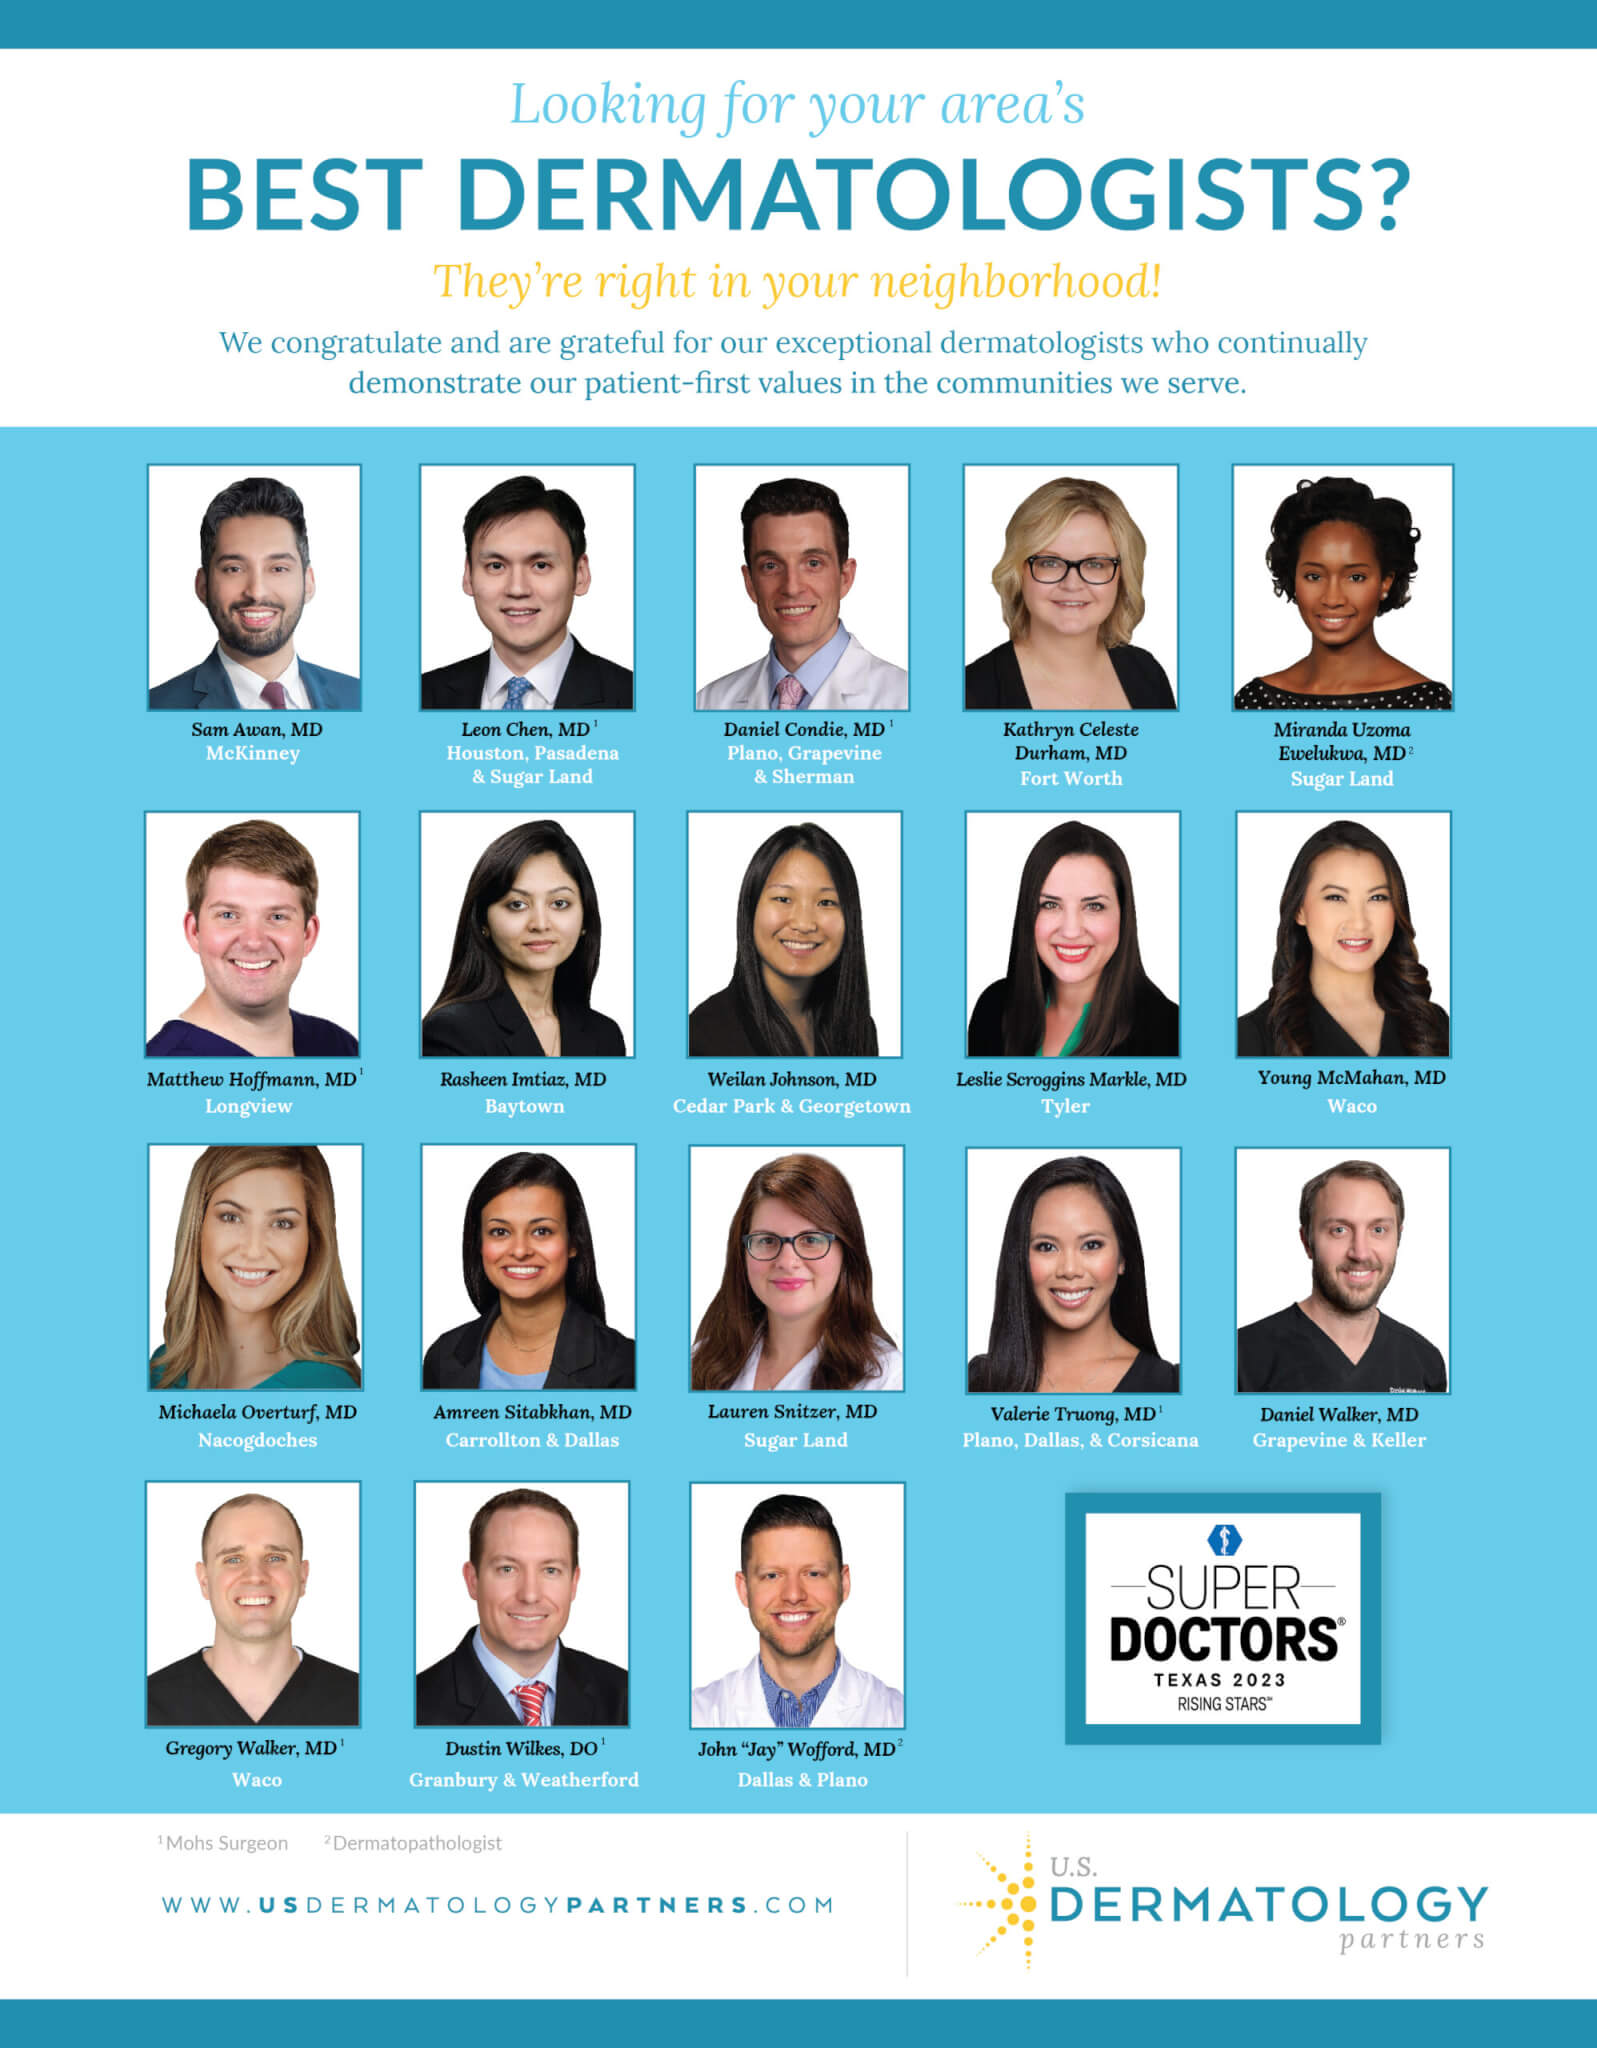 Texas Monthly Super Doctors 2023 Recognizes 18 U.S. Dermatology Partners Physicians as Rising Stars in Peer-Nominated Award